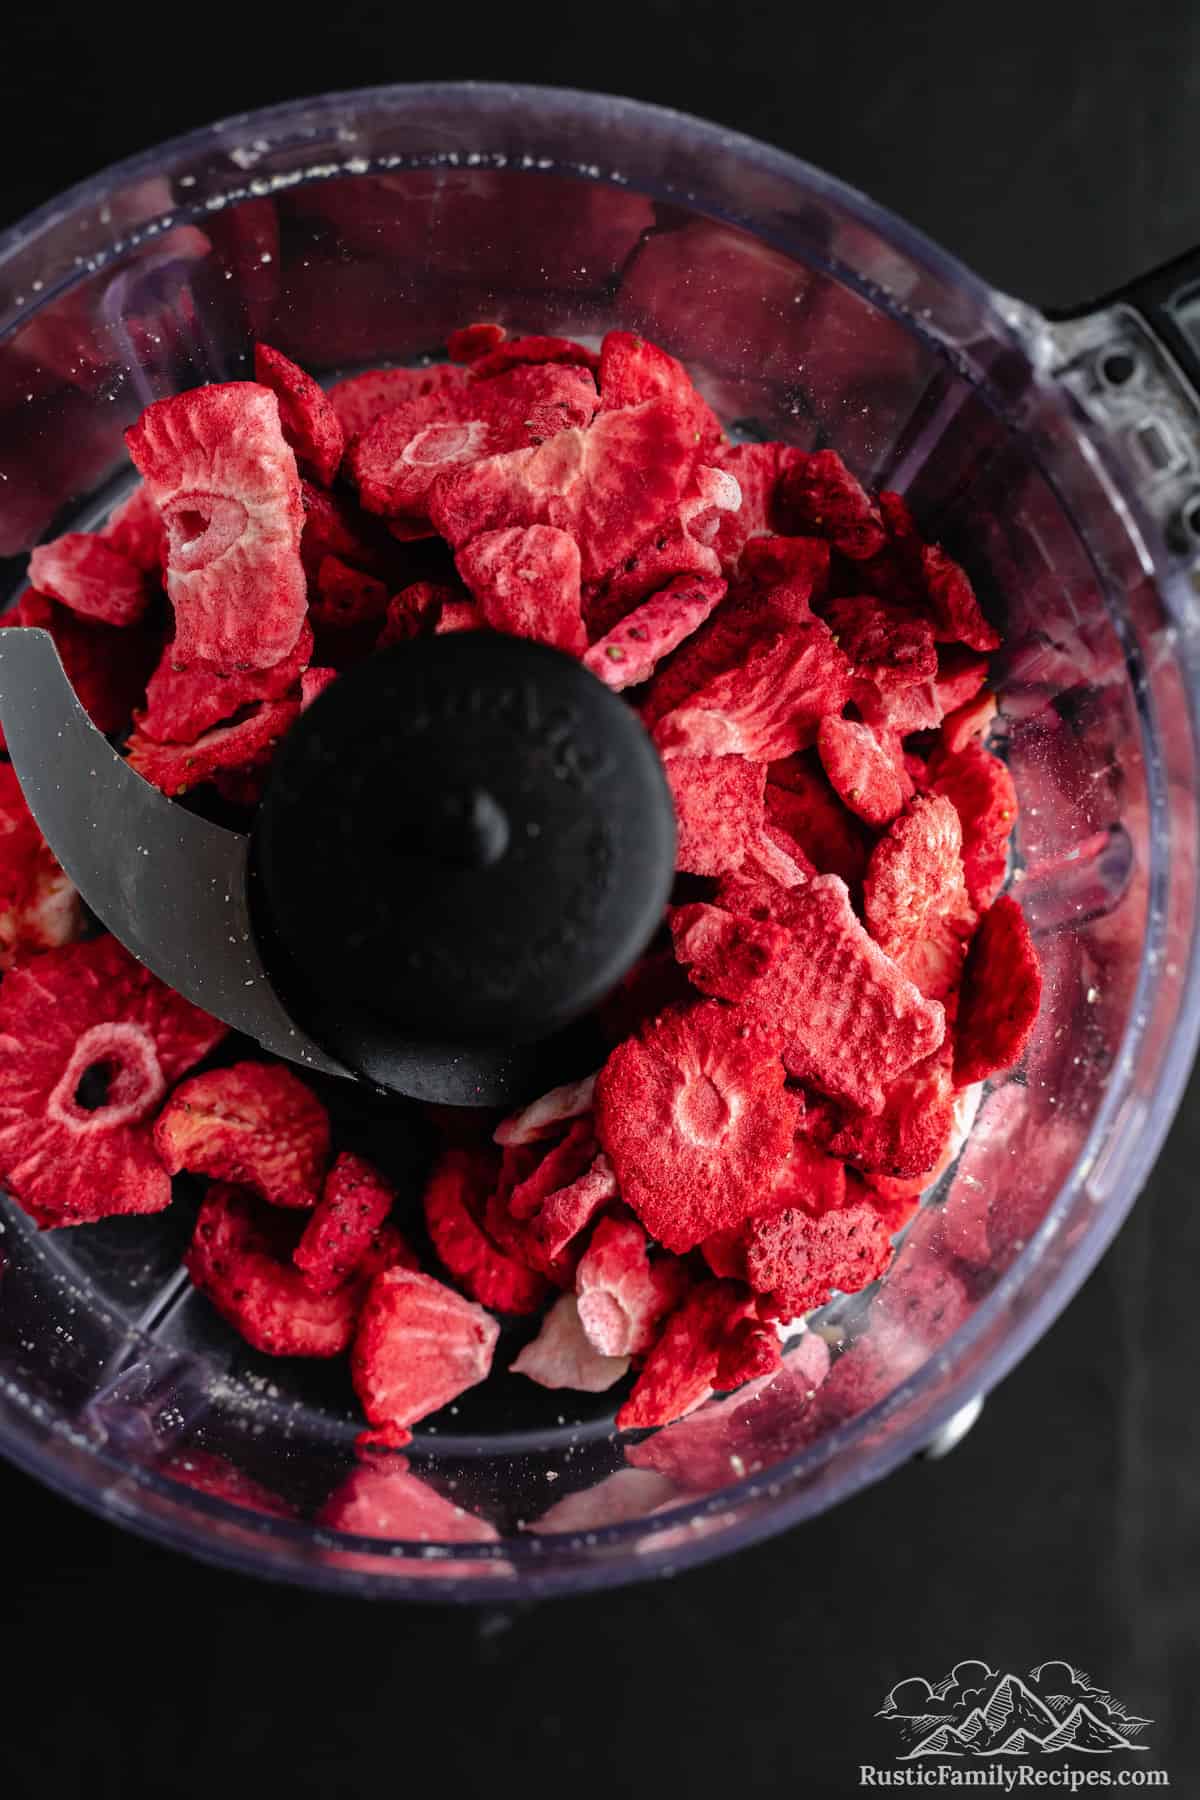 Top view of dried strawberries inside a food processor.